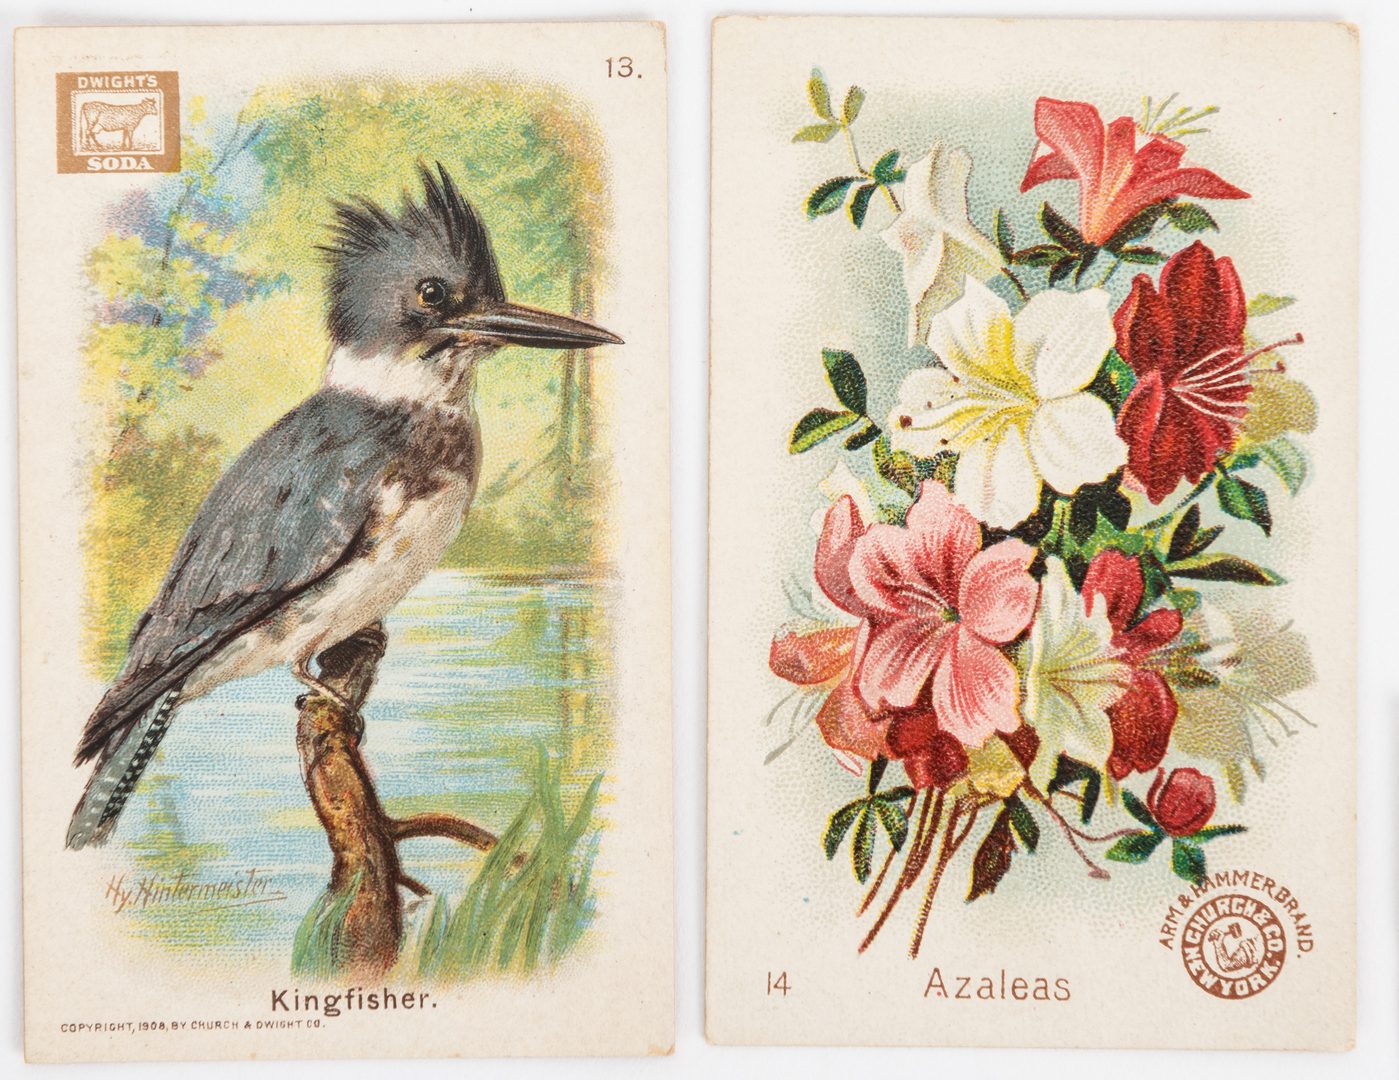 Lot 406: Collection of 893 Advertising Trade Cards